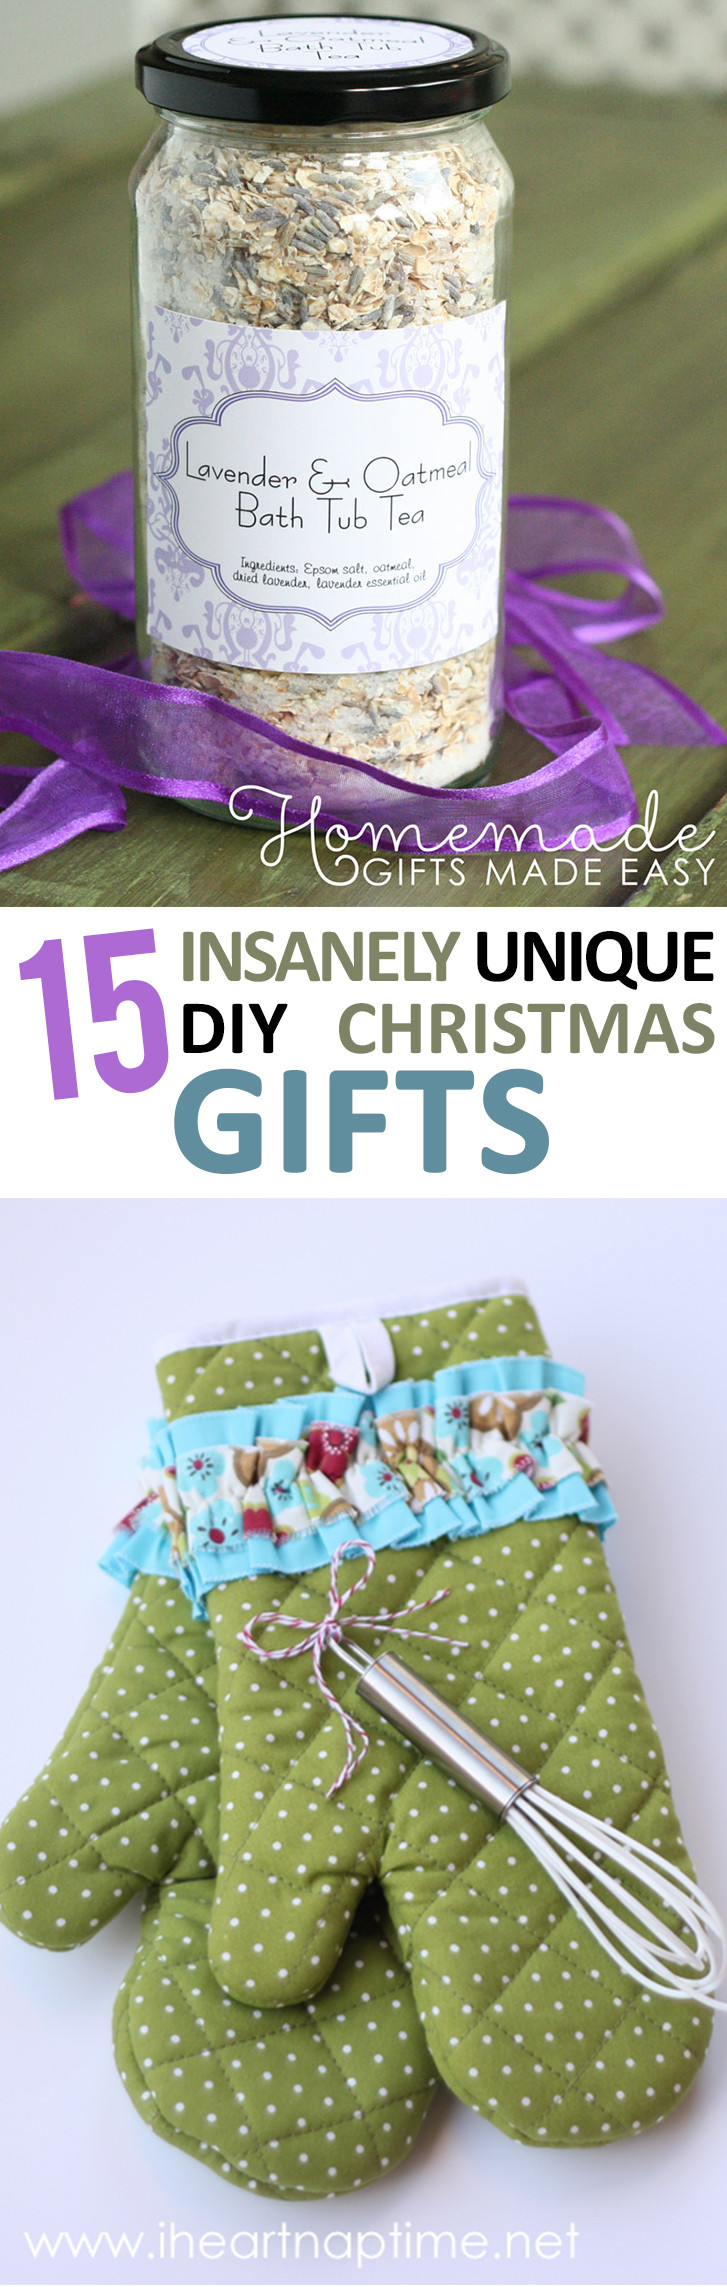 Cool DIY Christmas Gifts
 15 Insanely Unique DIY Christmas Gifts – Sunlit Spaces